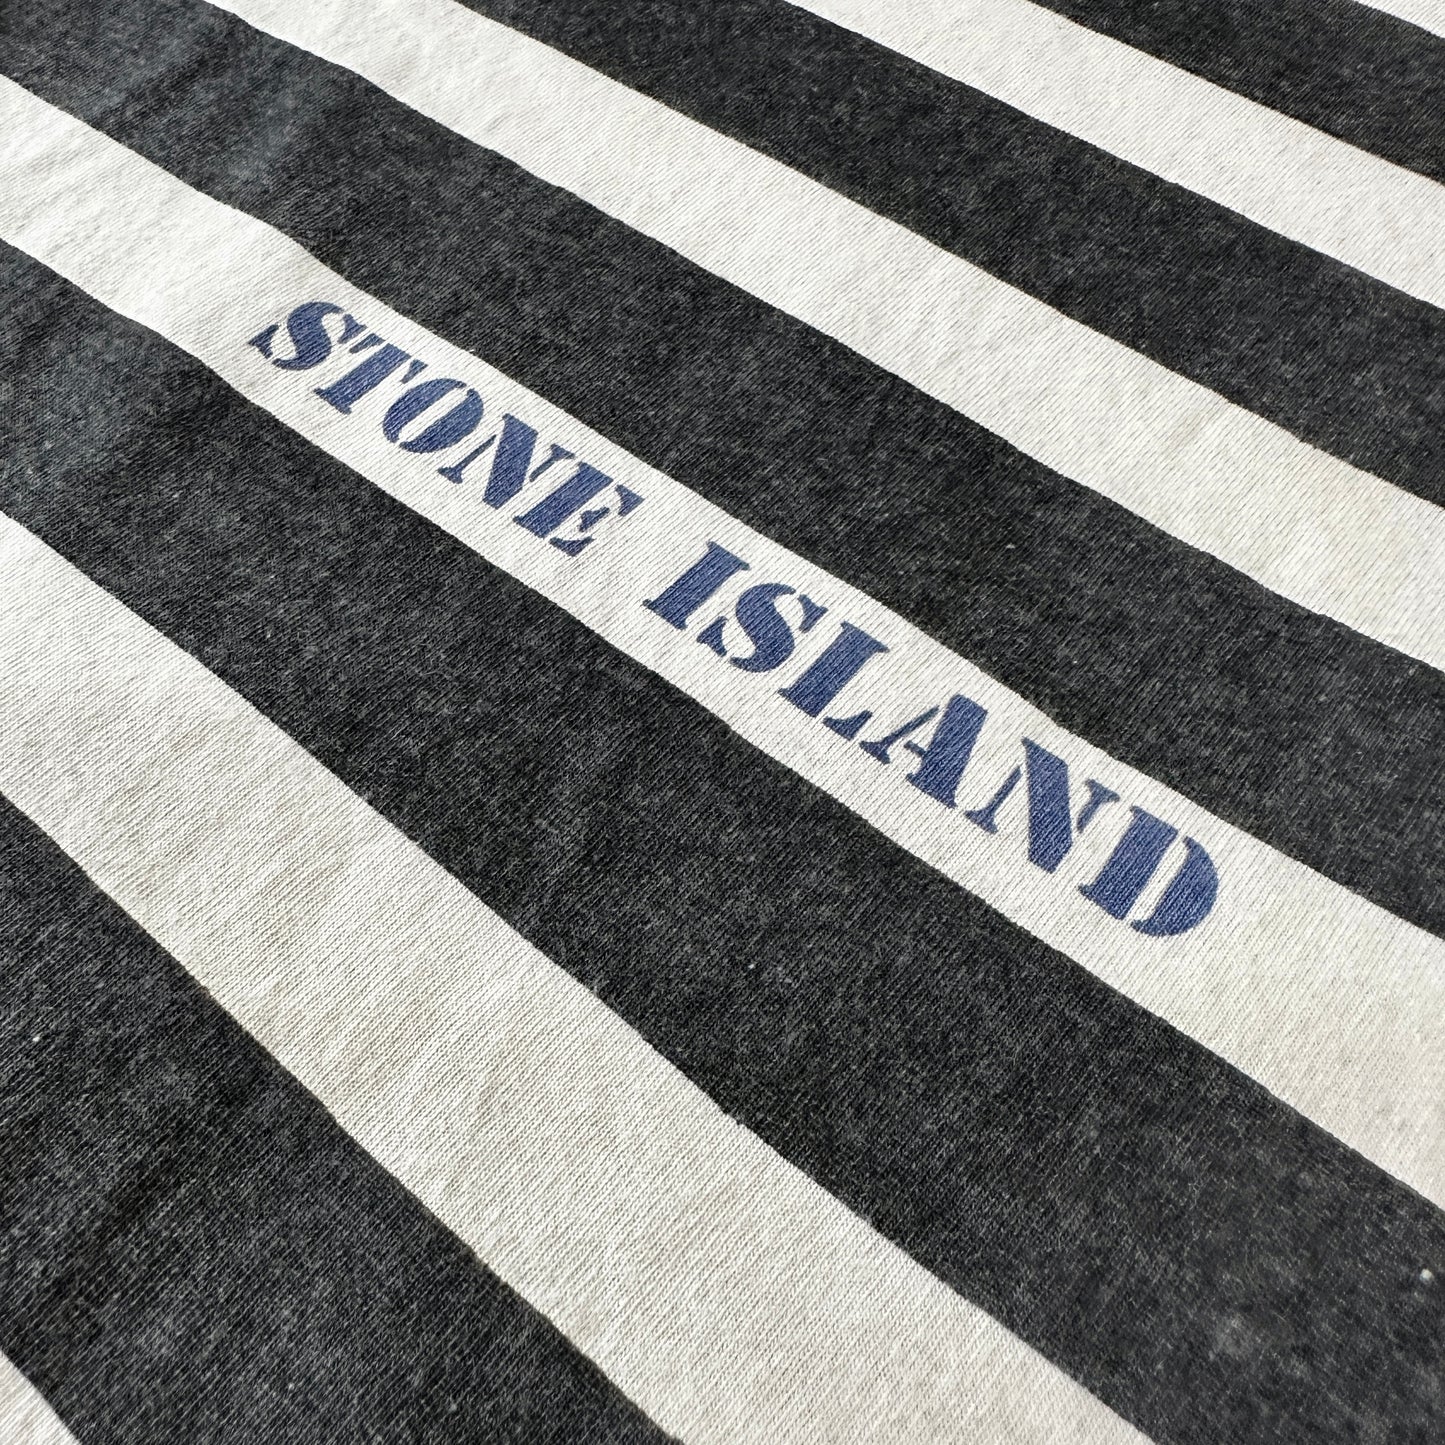 Stone Island Vintage 90s T-Shirt - XL - Made in Italy